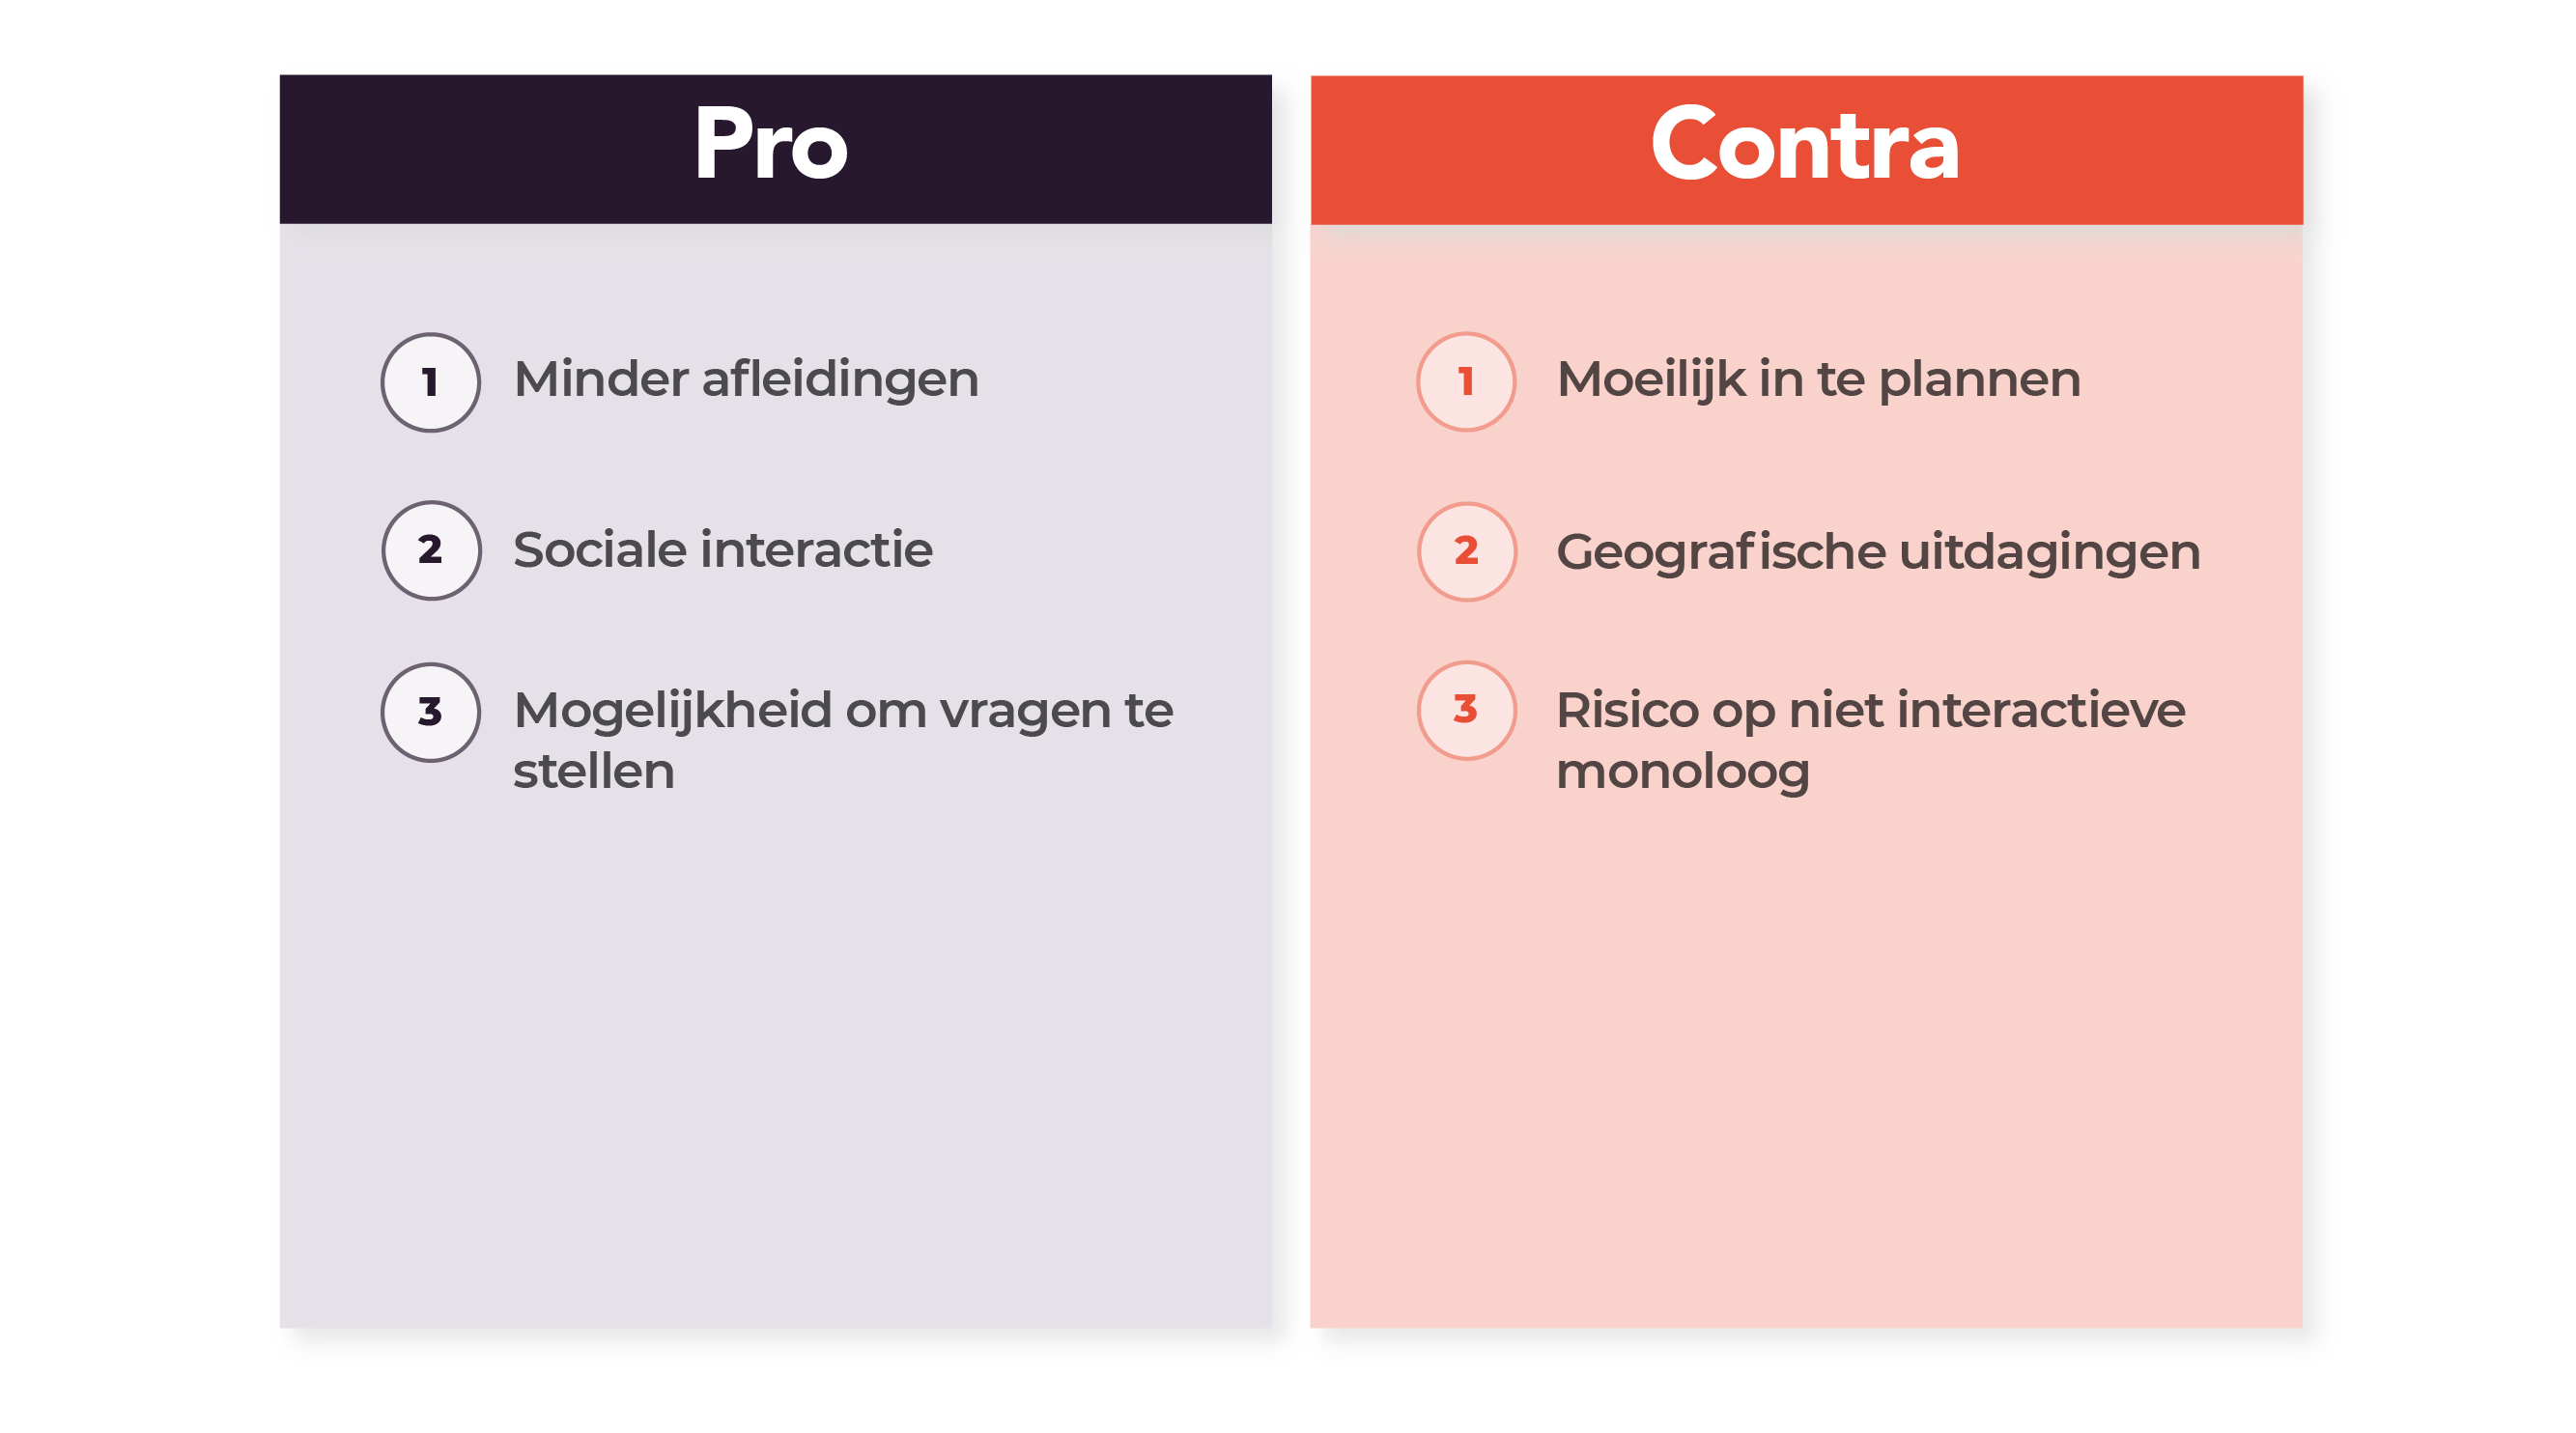 Pros and cons - NL version 1